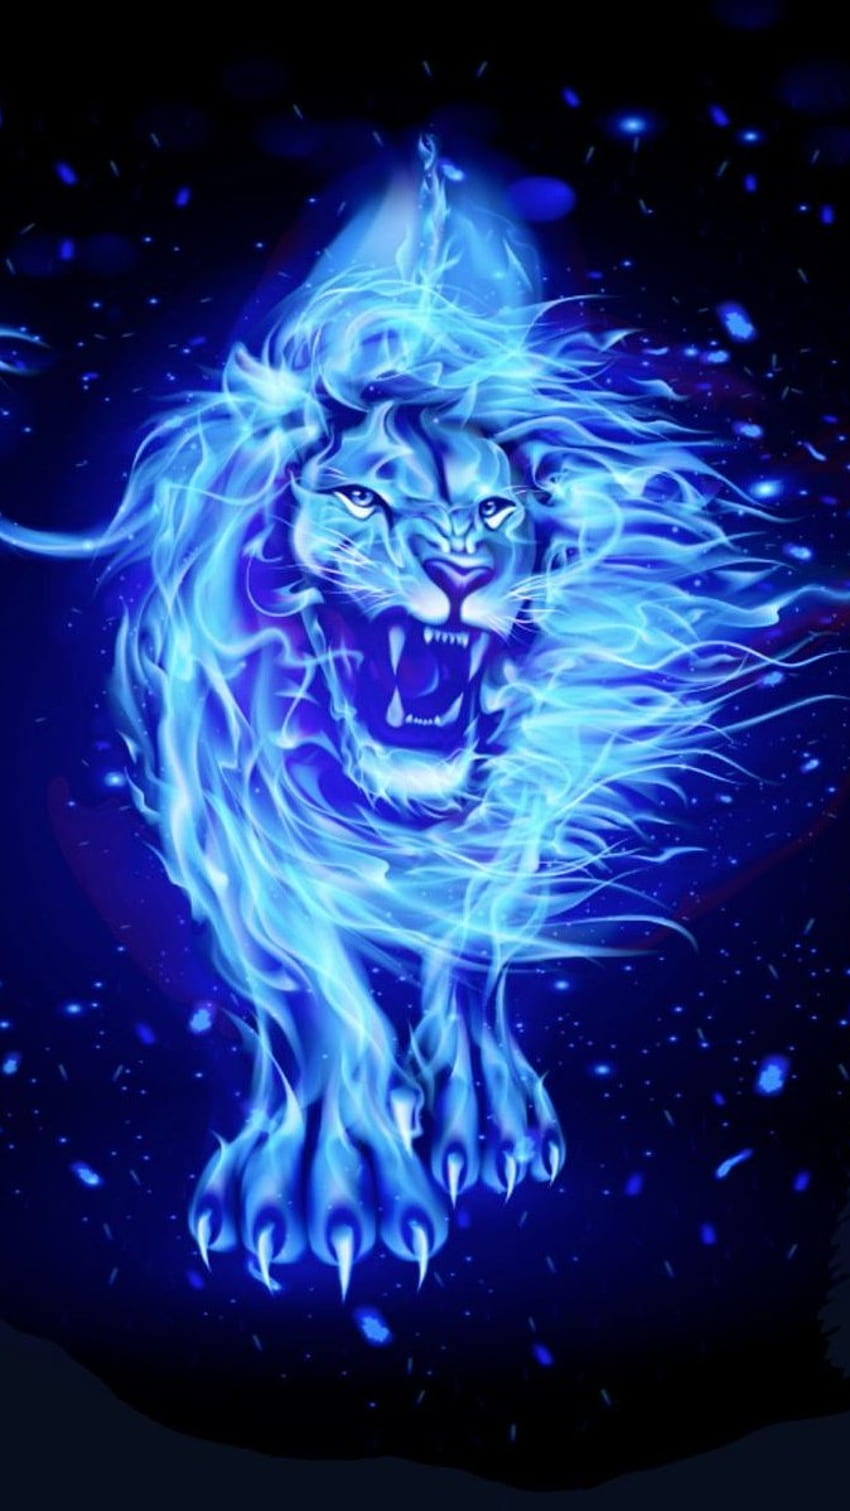 Blue Eyes Lion IPhone Wallpaper  IPhone Wallpapers  iPhone Wallpapers